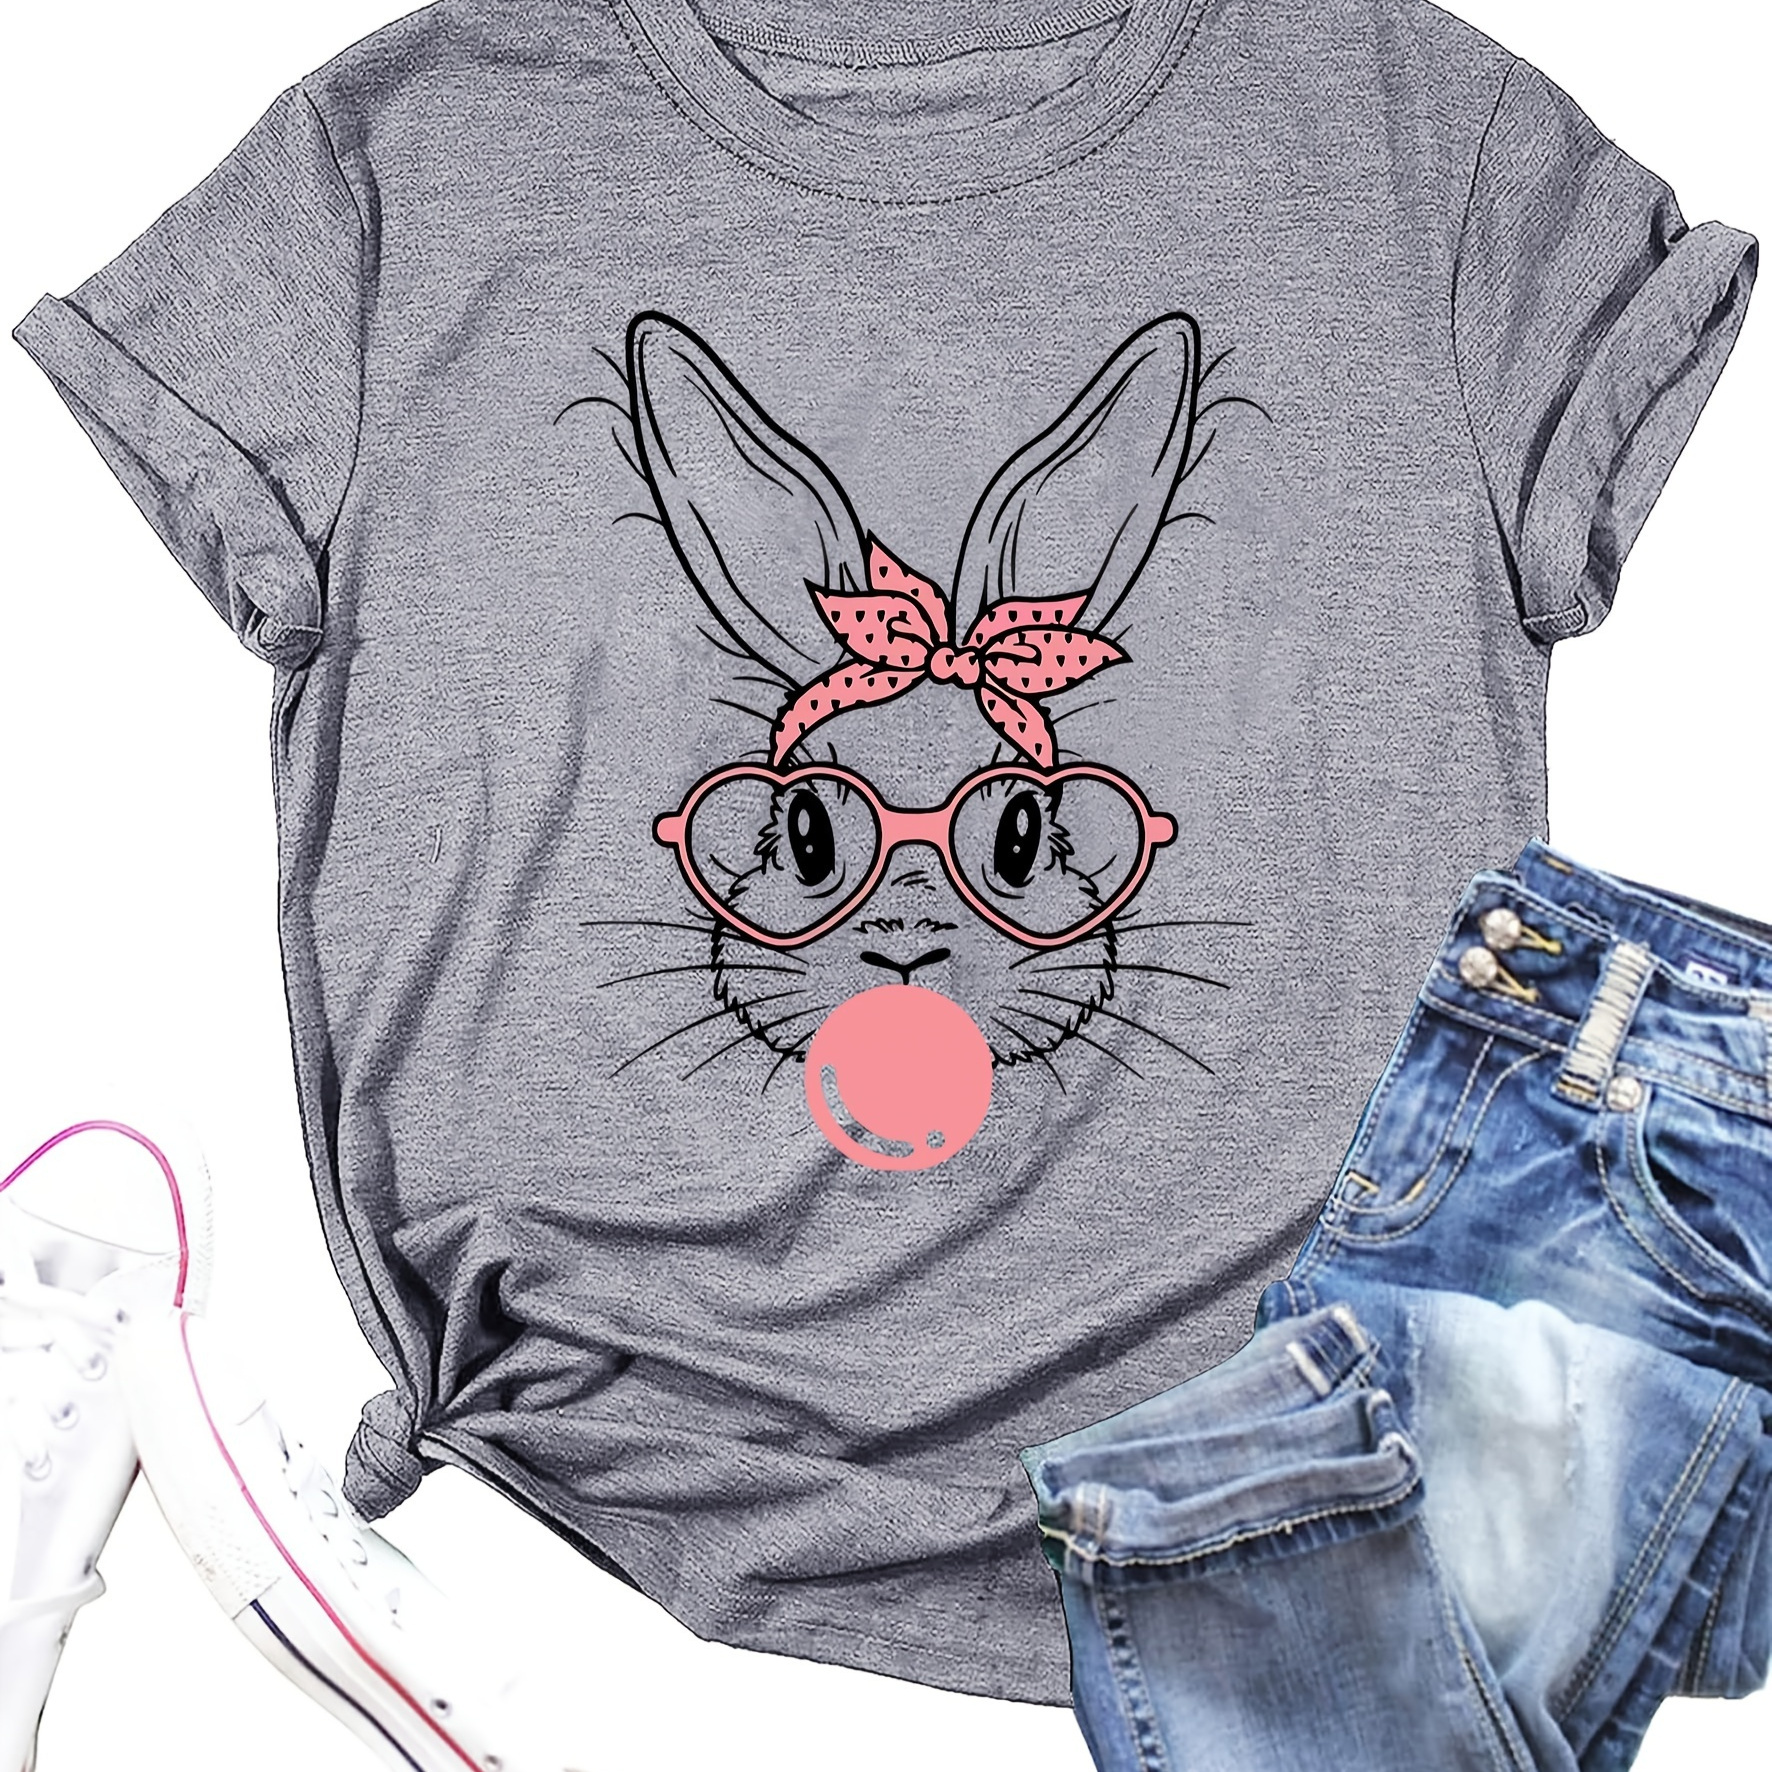 

Bunny Print Crew Neck T-shirt, Casual Short Sleeve T-shirt For Spring & Summer, Women's Clothing